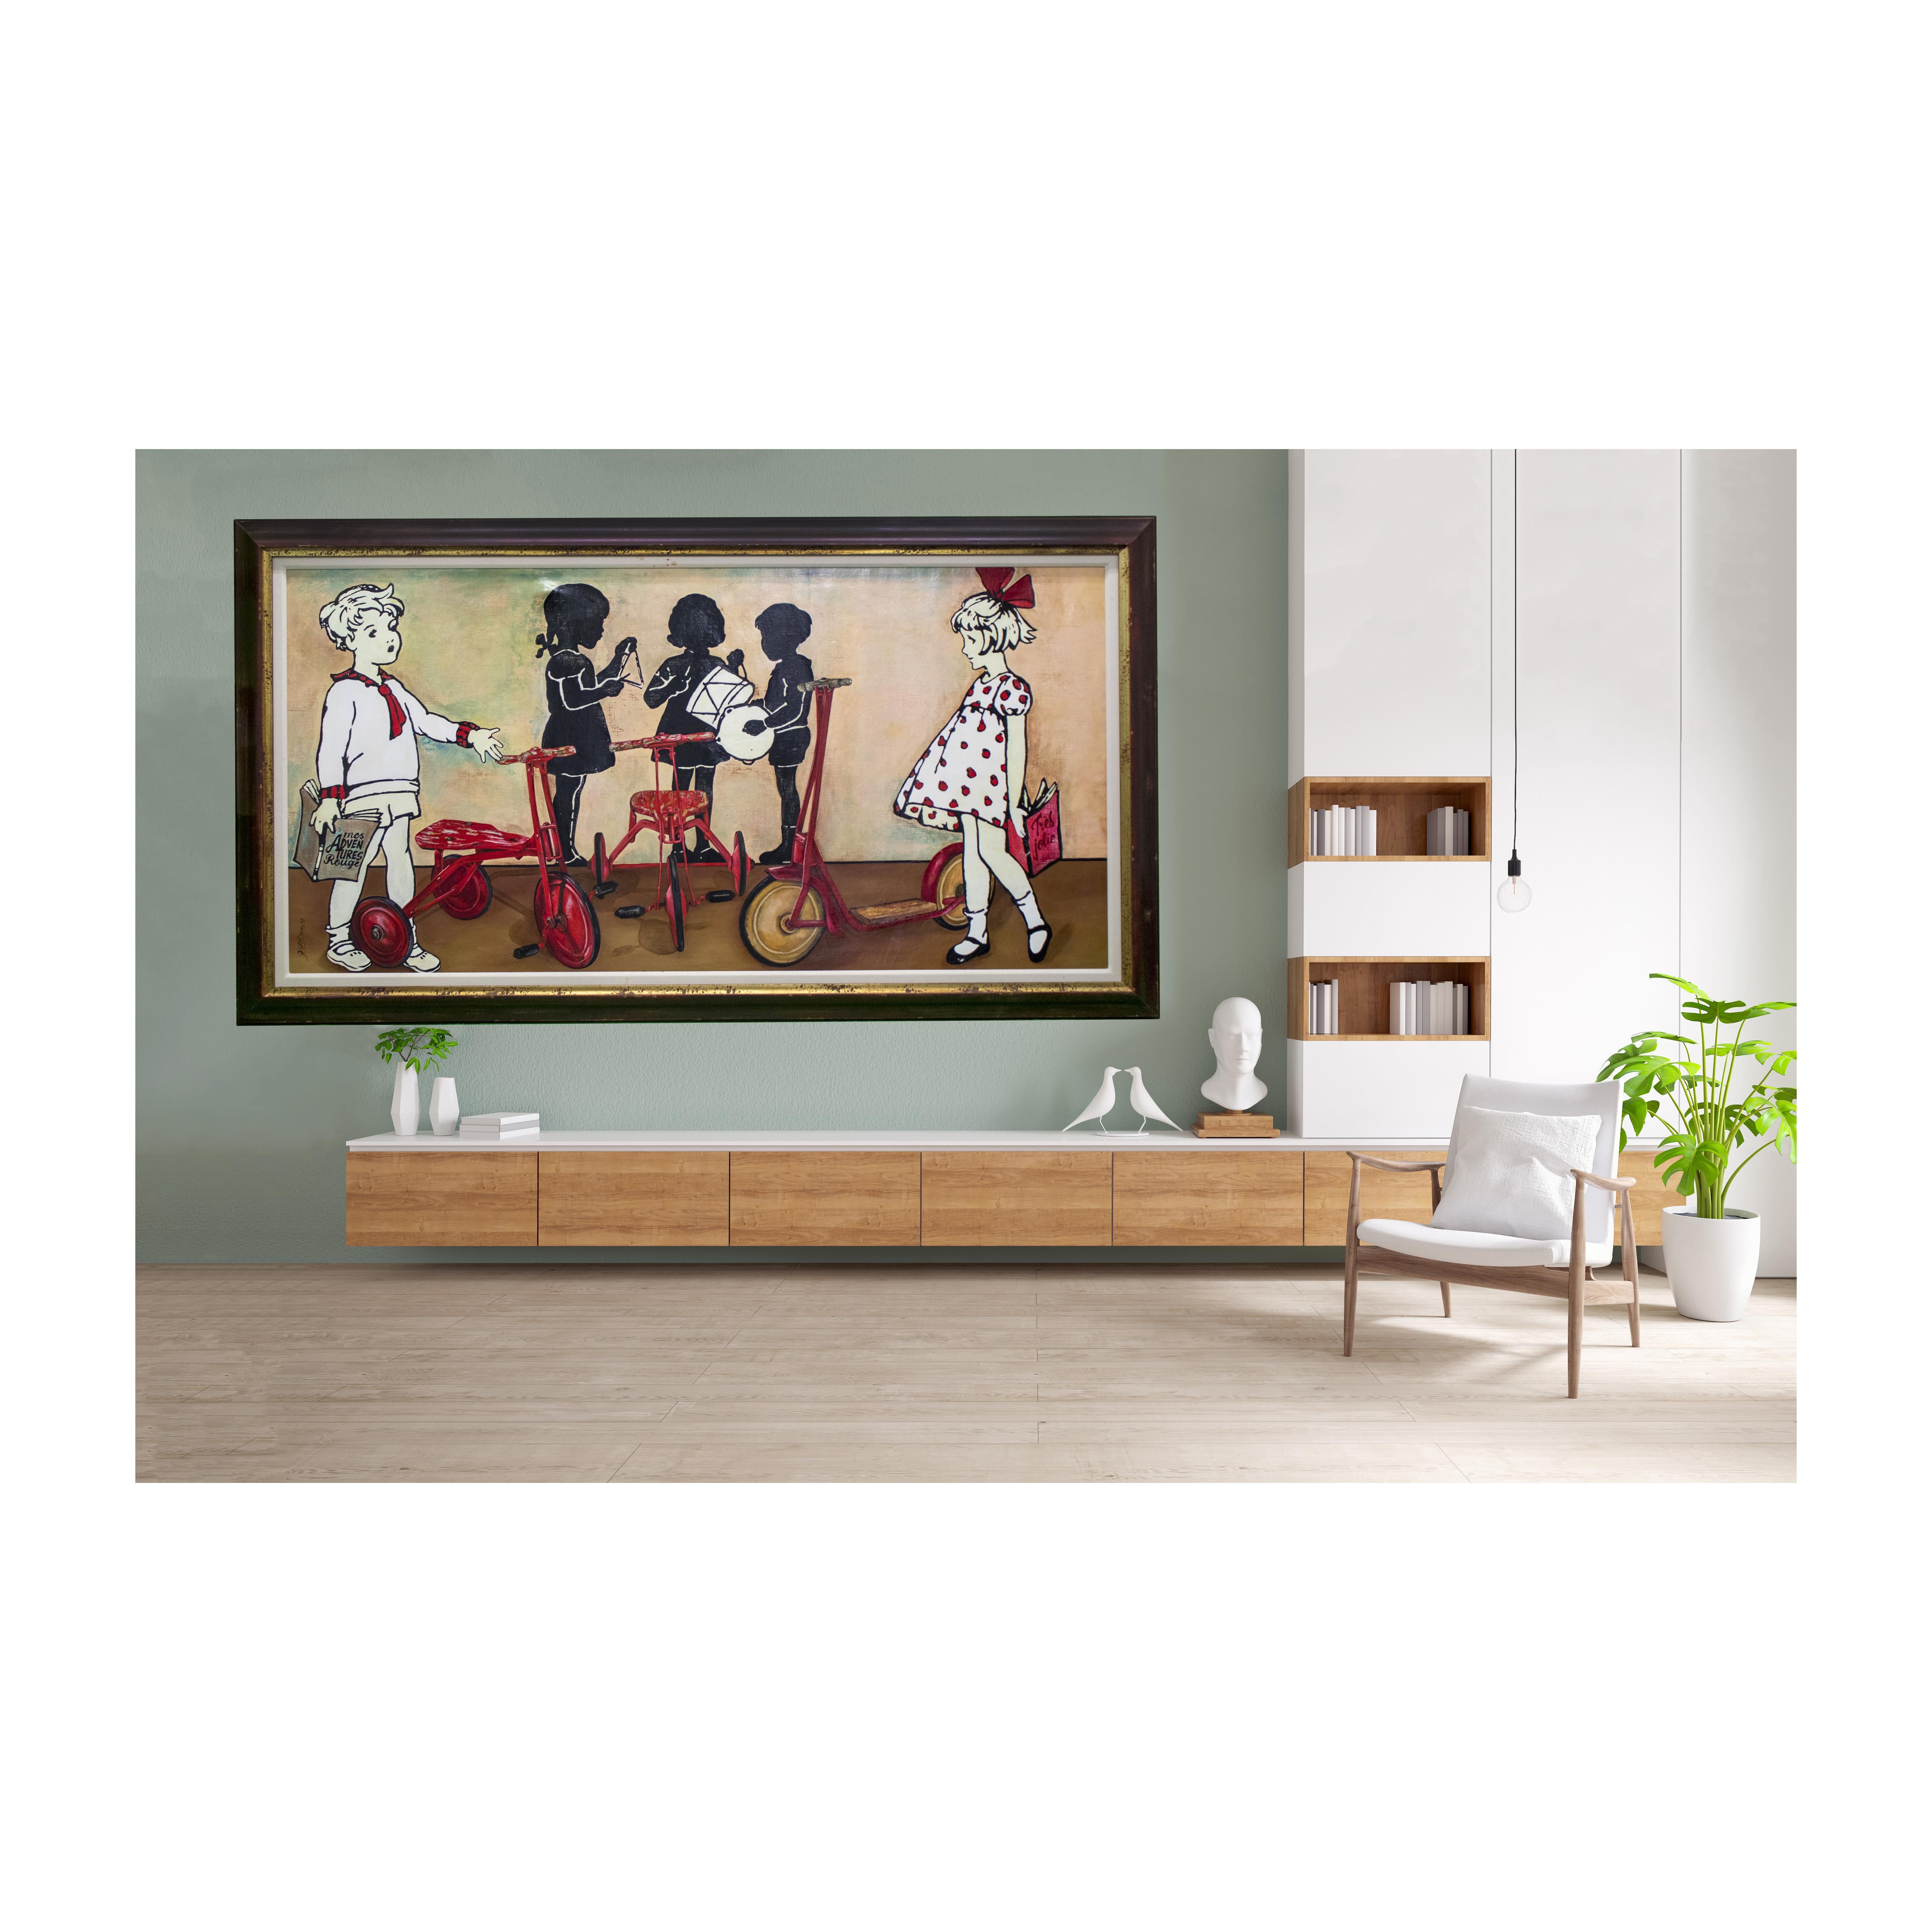 Original artwork by award winning Gwenda McDougall. This intriguing artwork was originally purchased at Art Basel Miami in 2008. Part of the Red Trike series, this large piece shows great color and whimsy.

Dimensions: height: 51 inches / width: